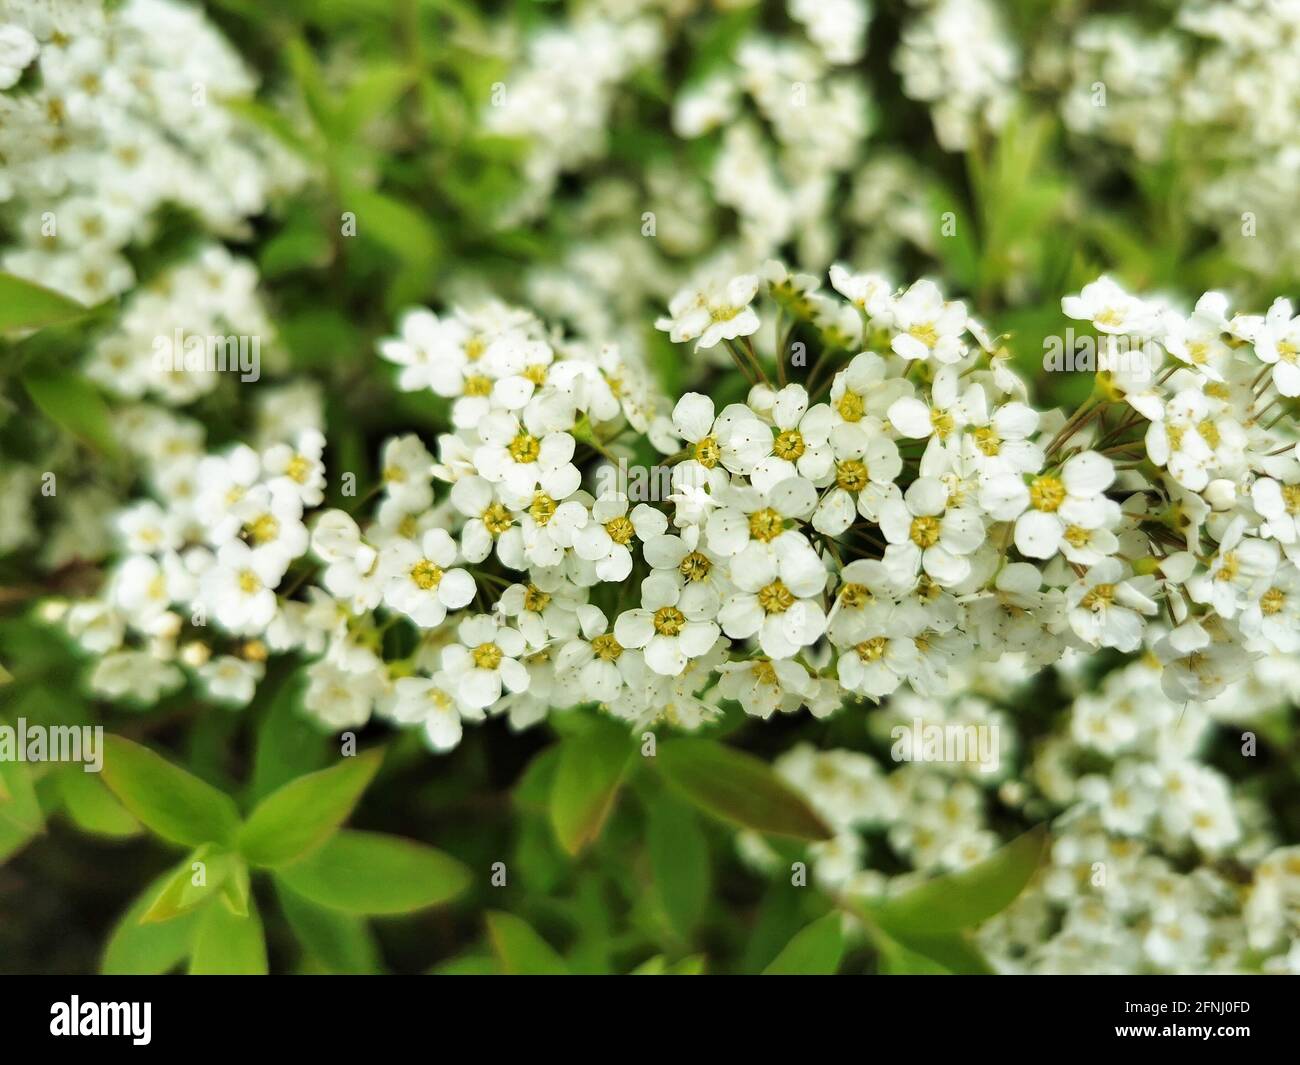 Closeup shot of white Snowmound flowers with green leaves Stock Photo